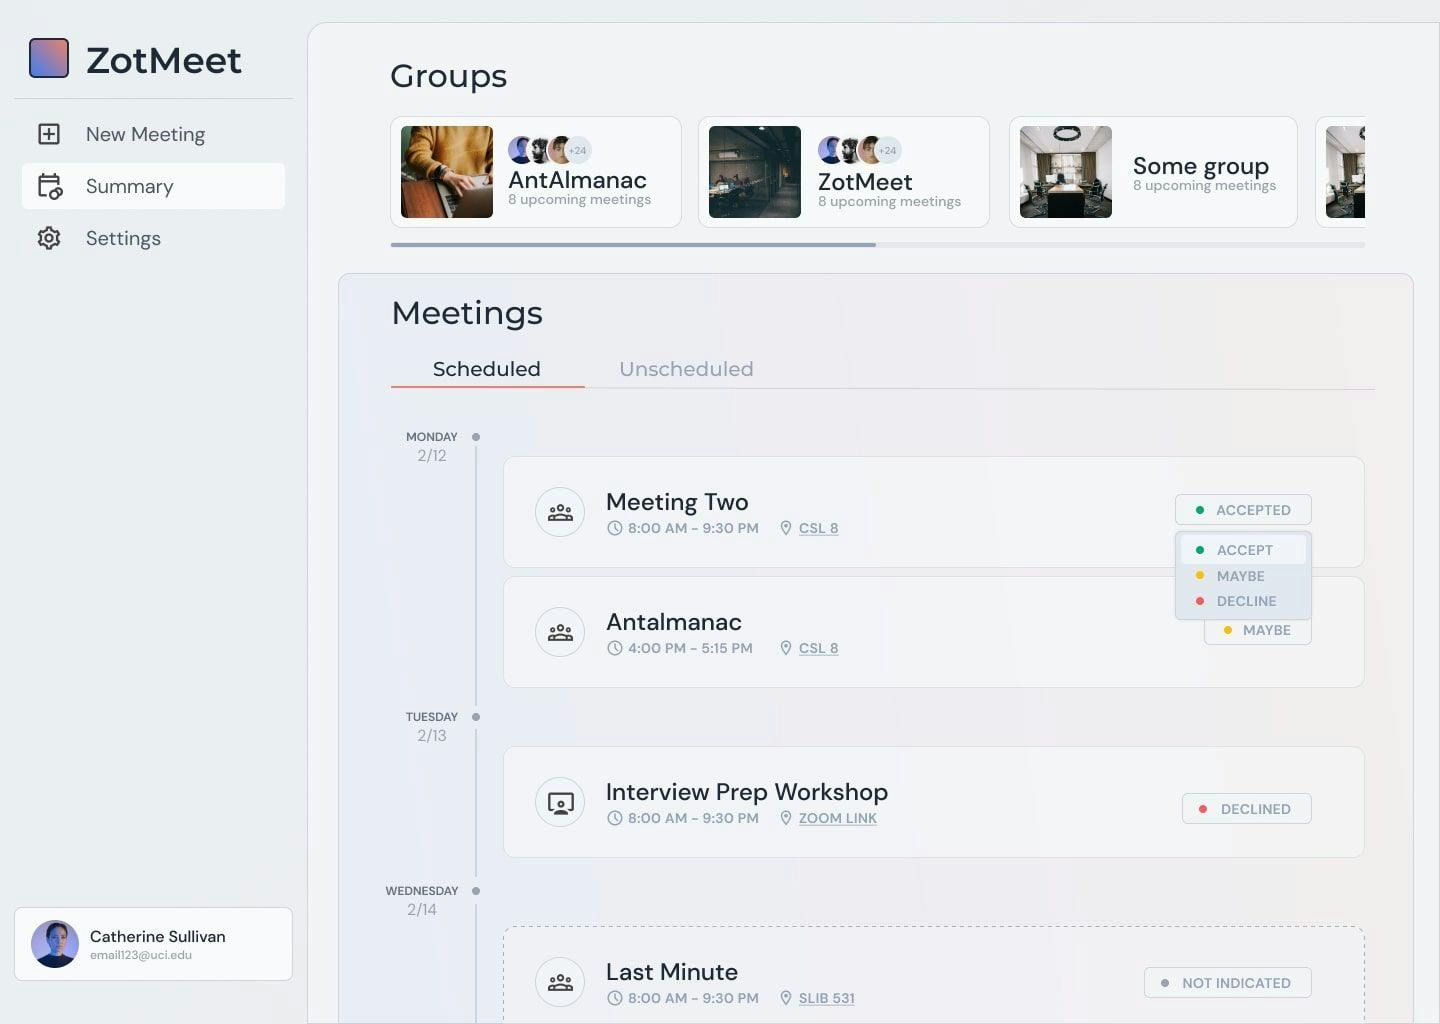 Design Preview of ZotMeet Summary Page